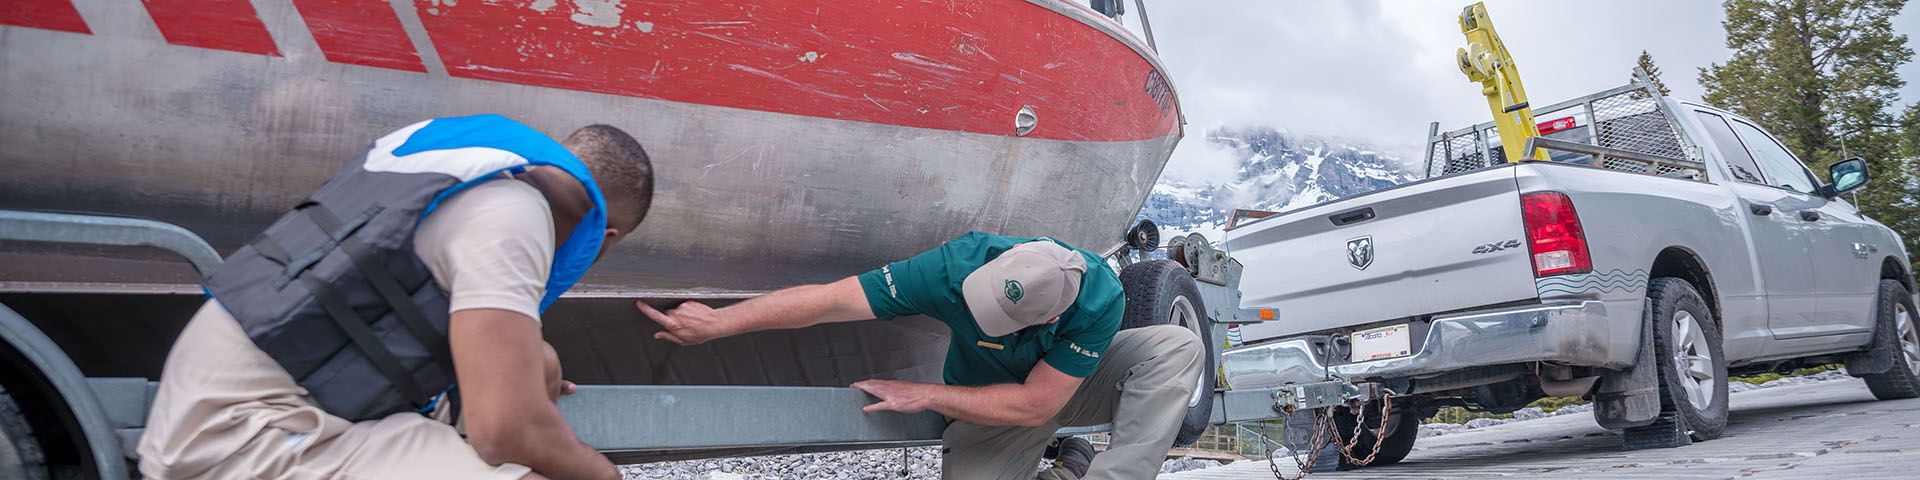 Parks Canada staff inspecting boat for aquatic invasive species